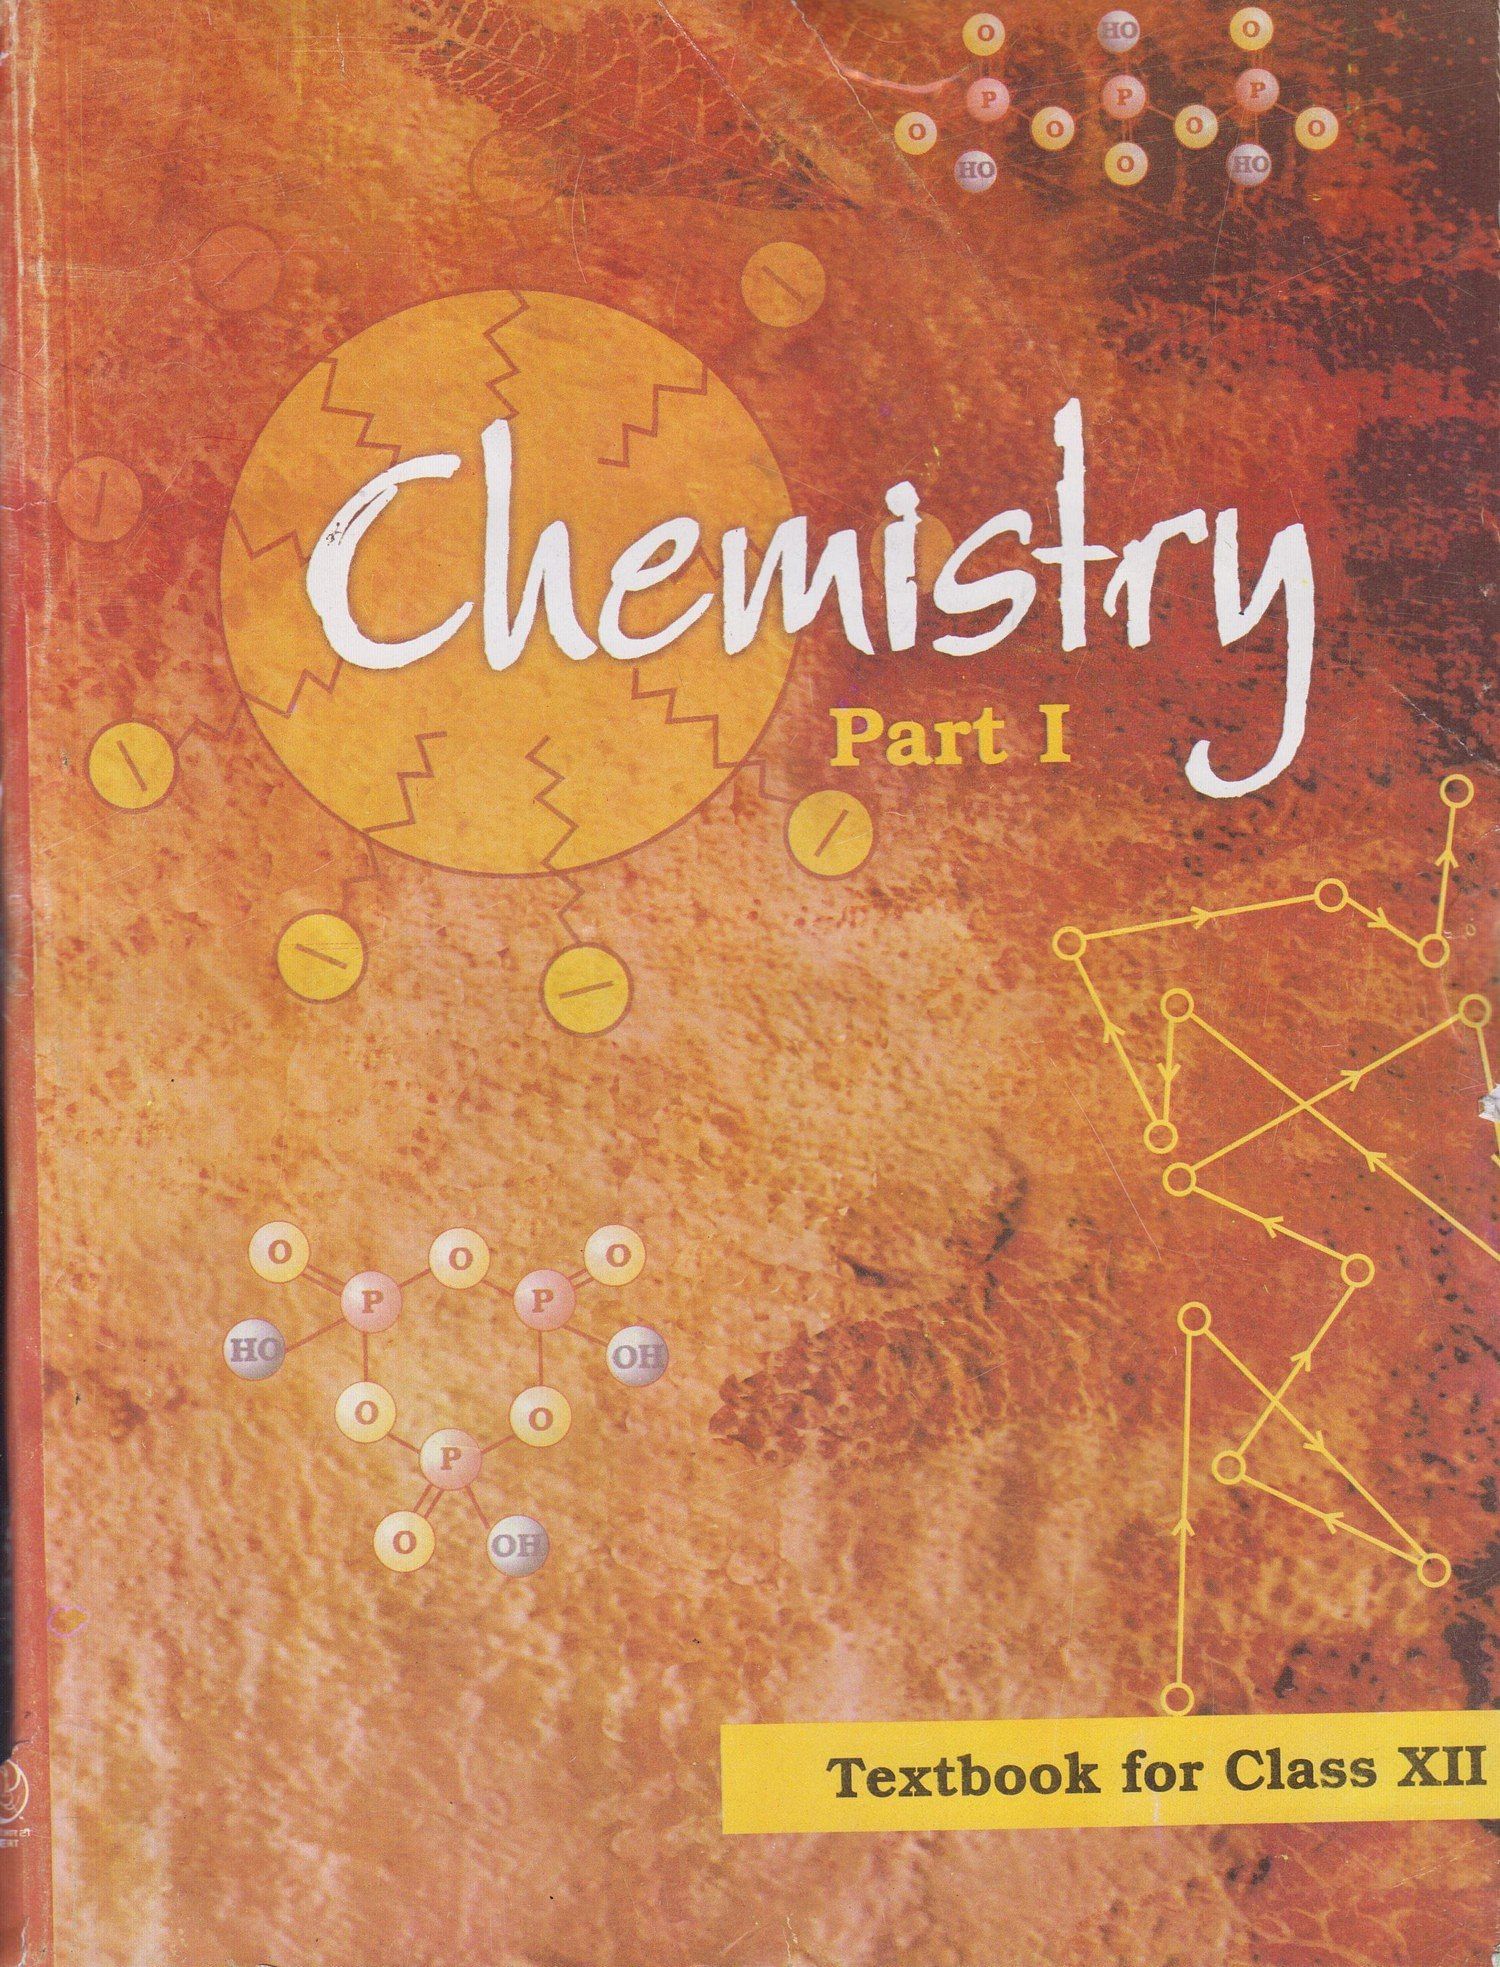 IISER Chemistry Reference Book